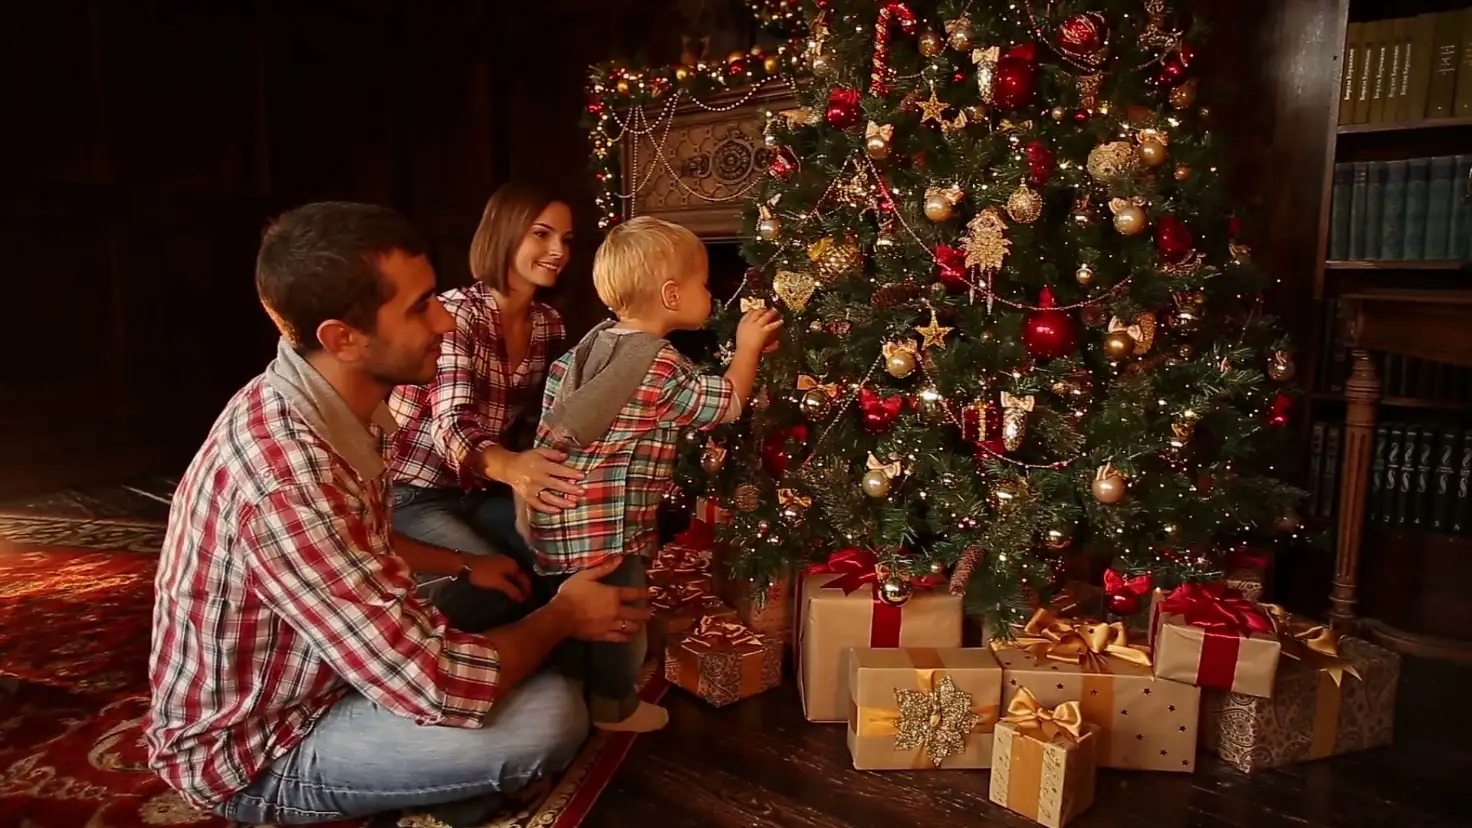 Decorating your home for Christmas with your family